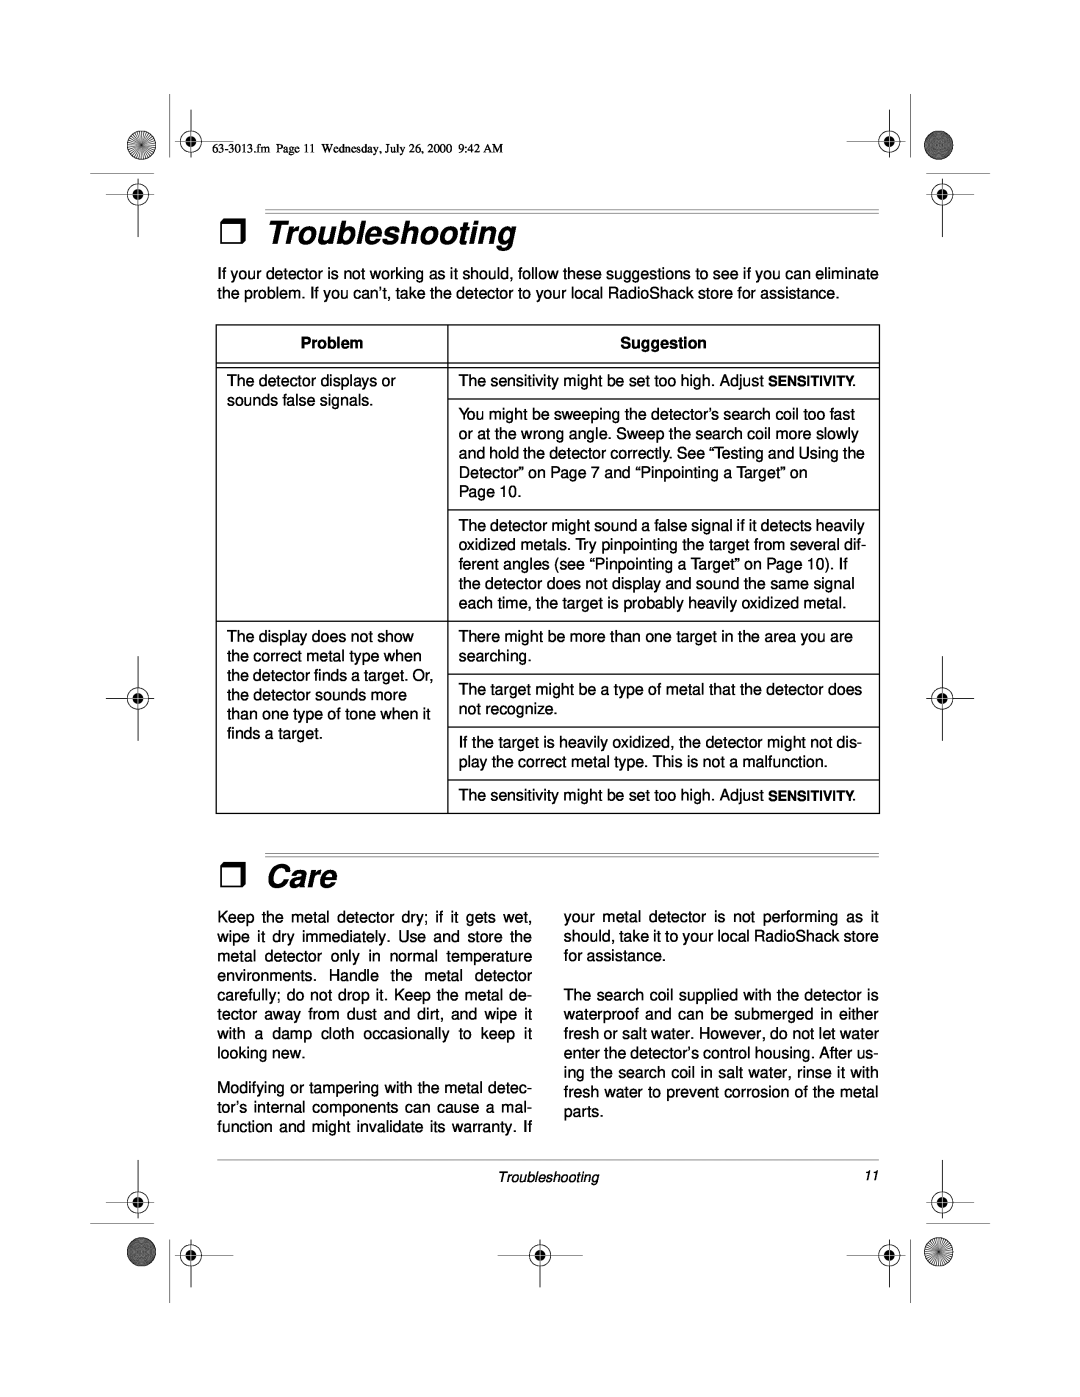 Radio Shack 63-3013 owner manual ˆTroubleshooting, ˆCare, Problem, Suggestion 